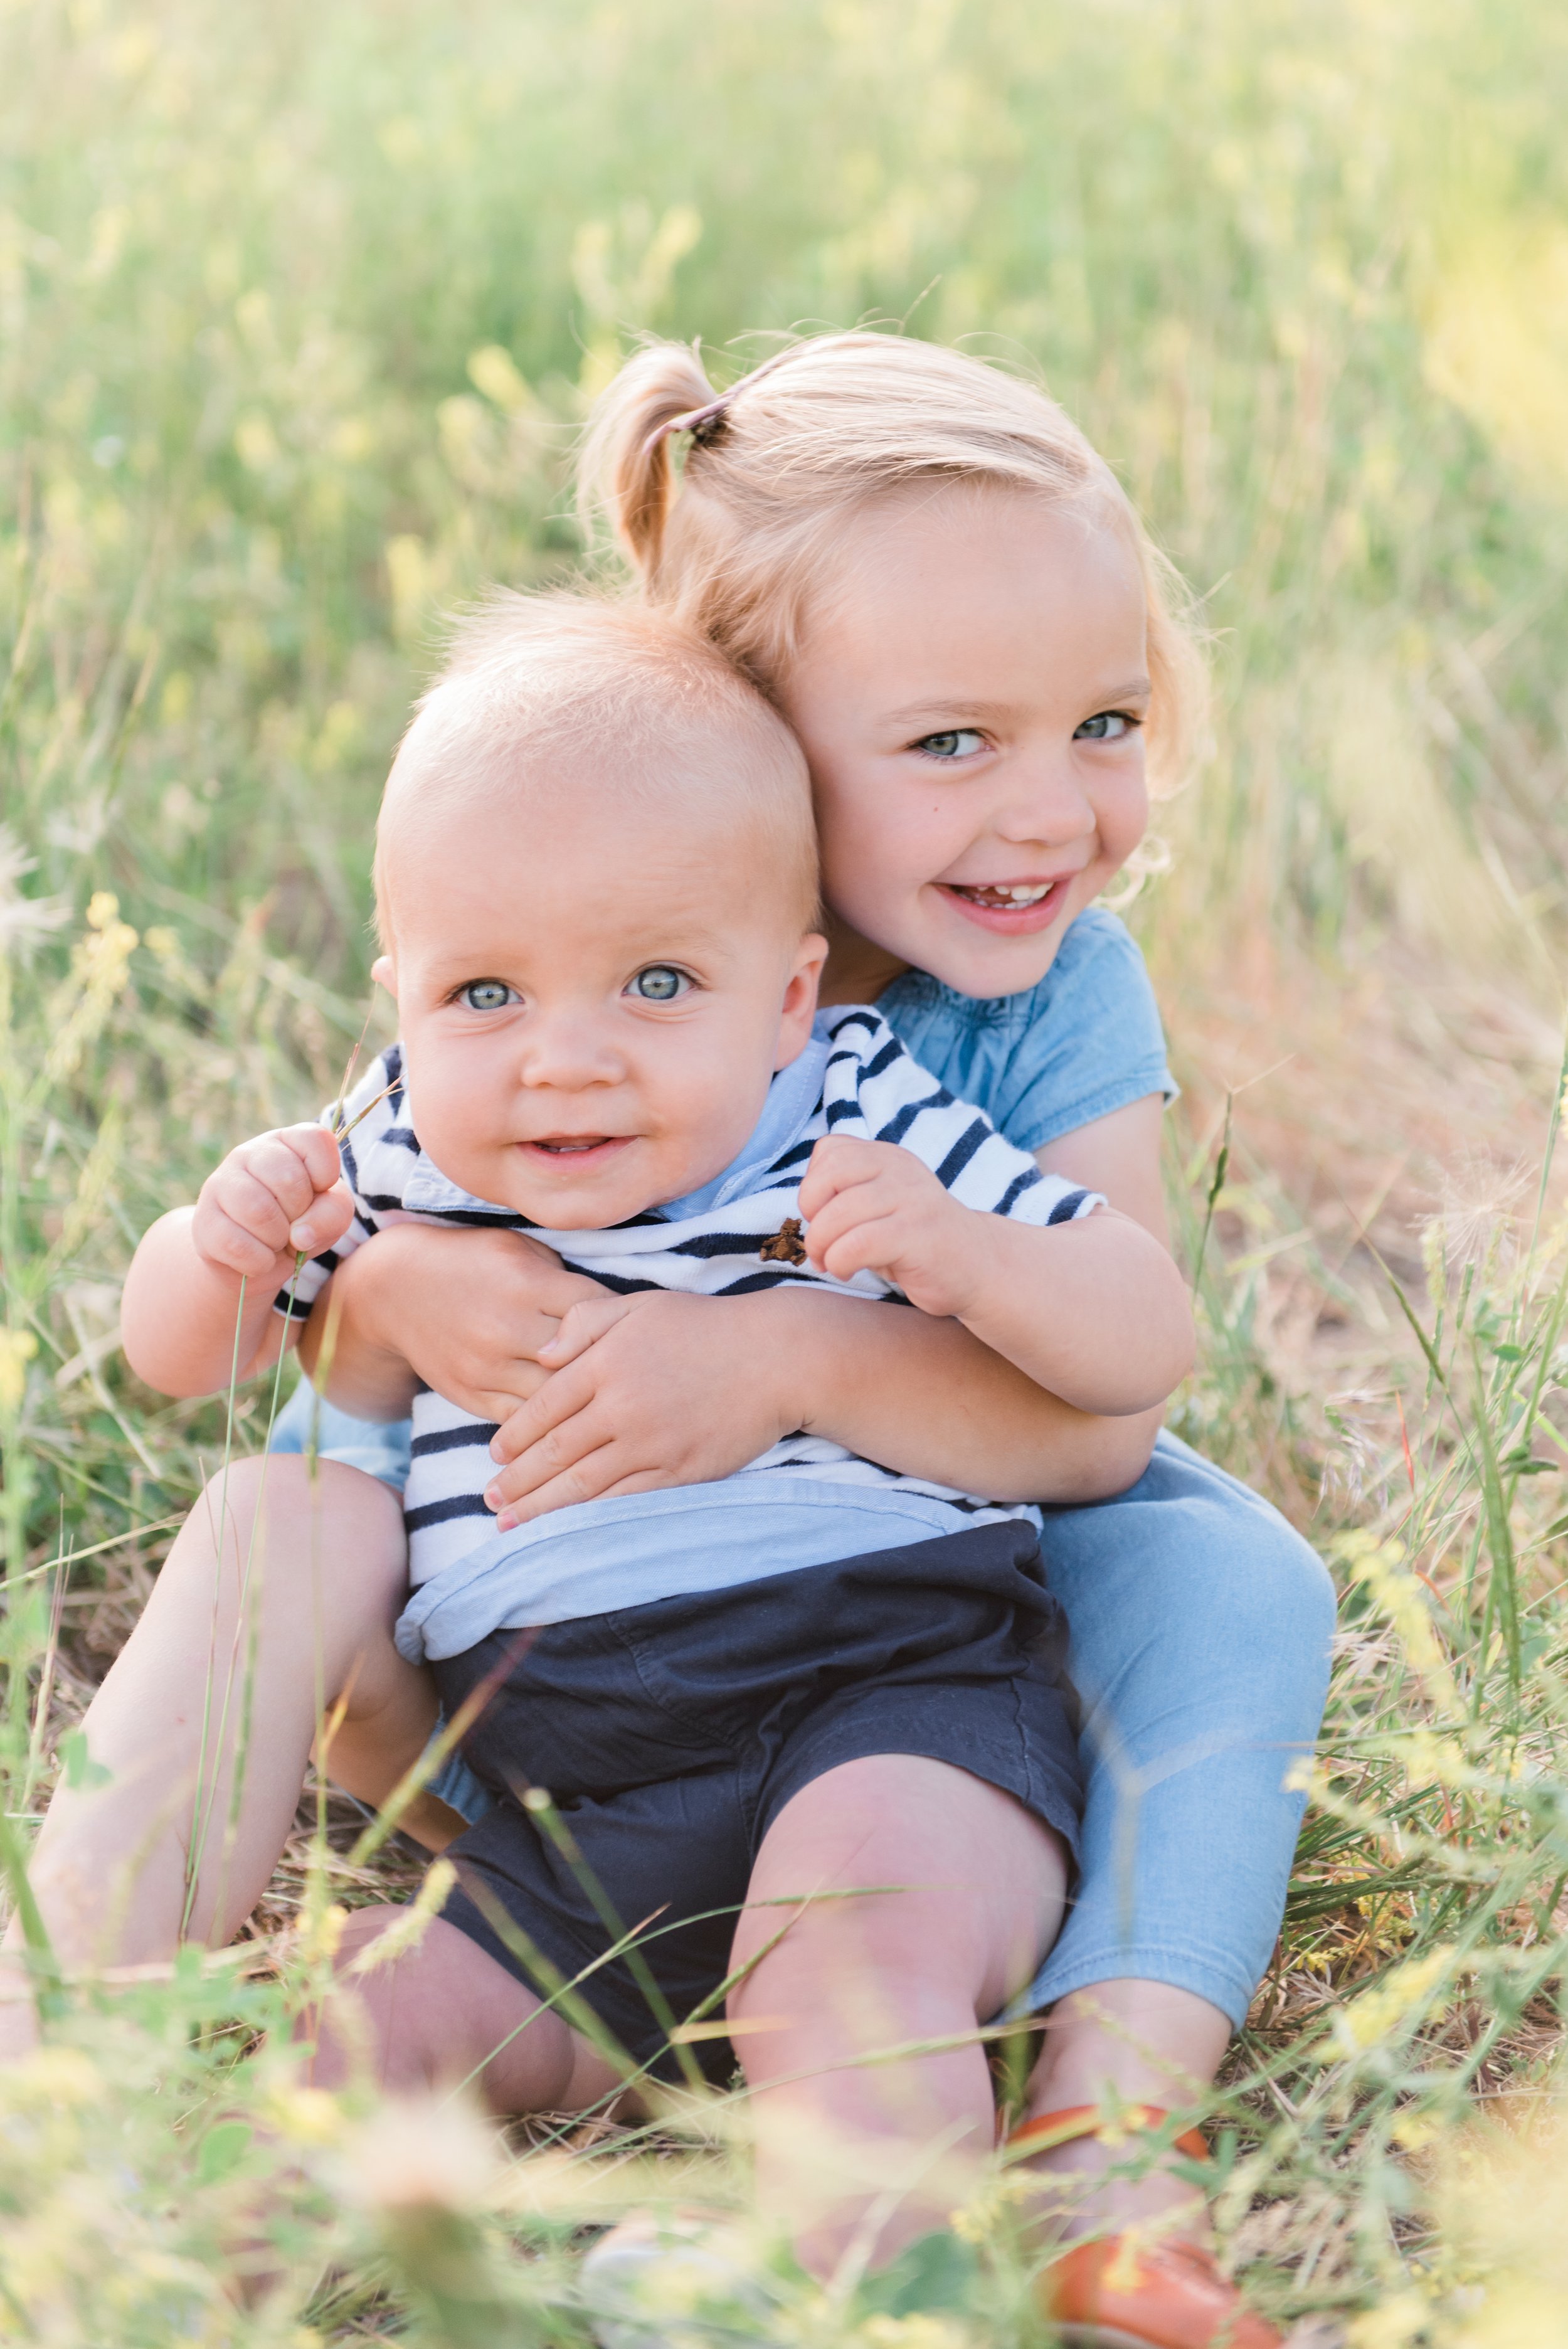  A baby brother is held on the lap of his big sister in a summer field. Young children photoshoot brother and sister summer photos Jacquie Erickson photography #brothersisterphoto #babybrother #jacquieerickson #youngkids #georgiaphotographer 